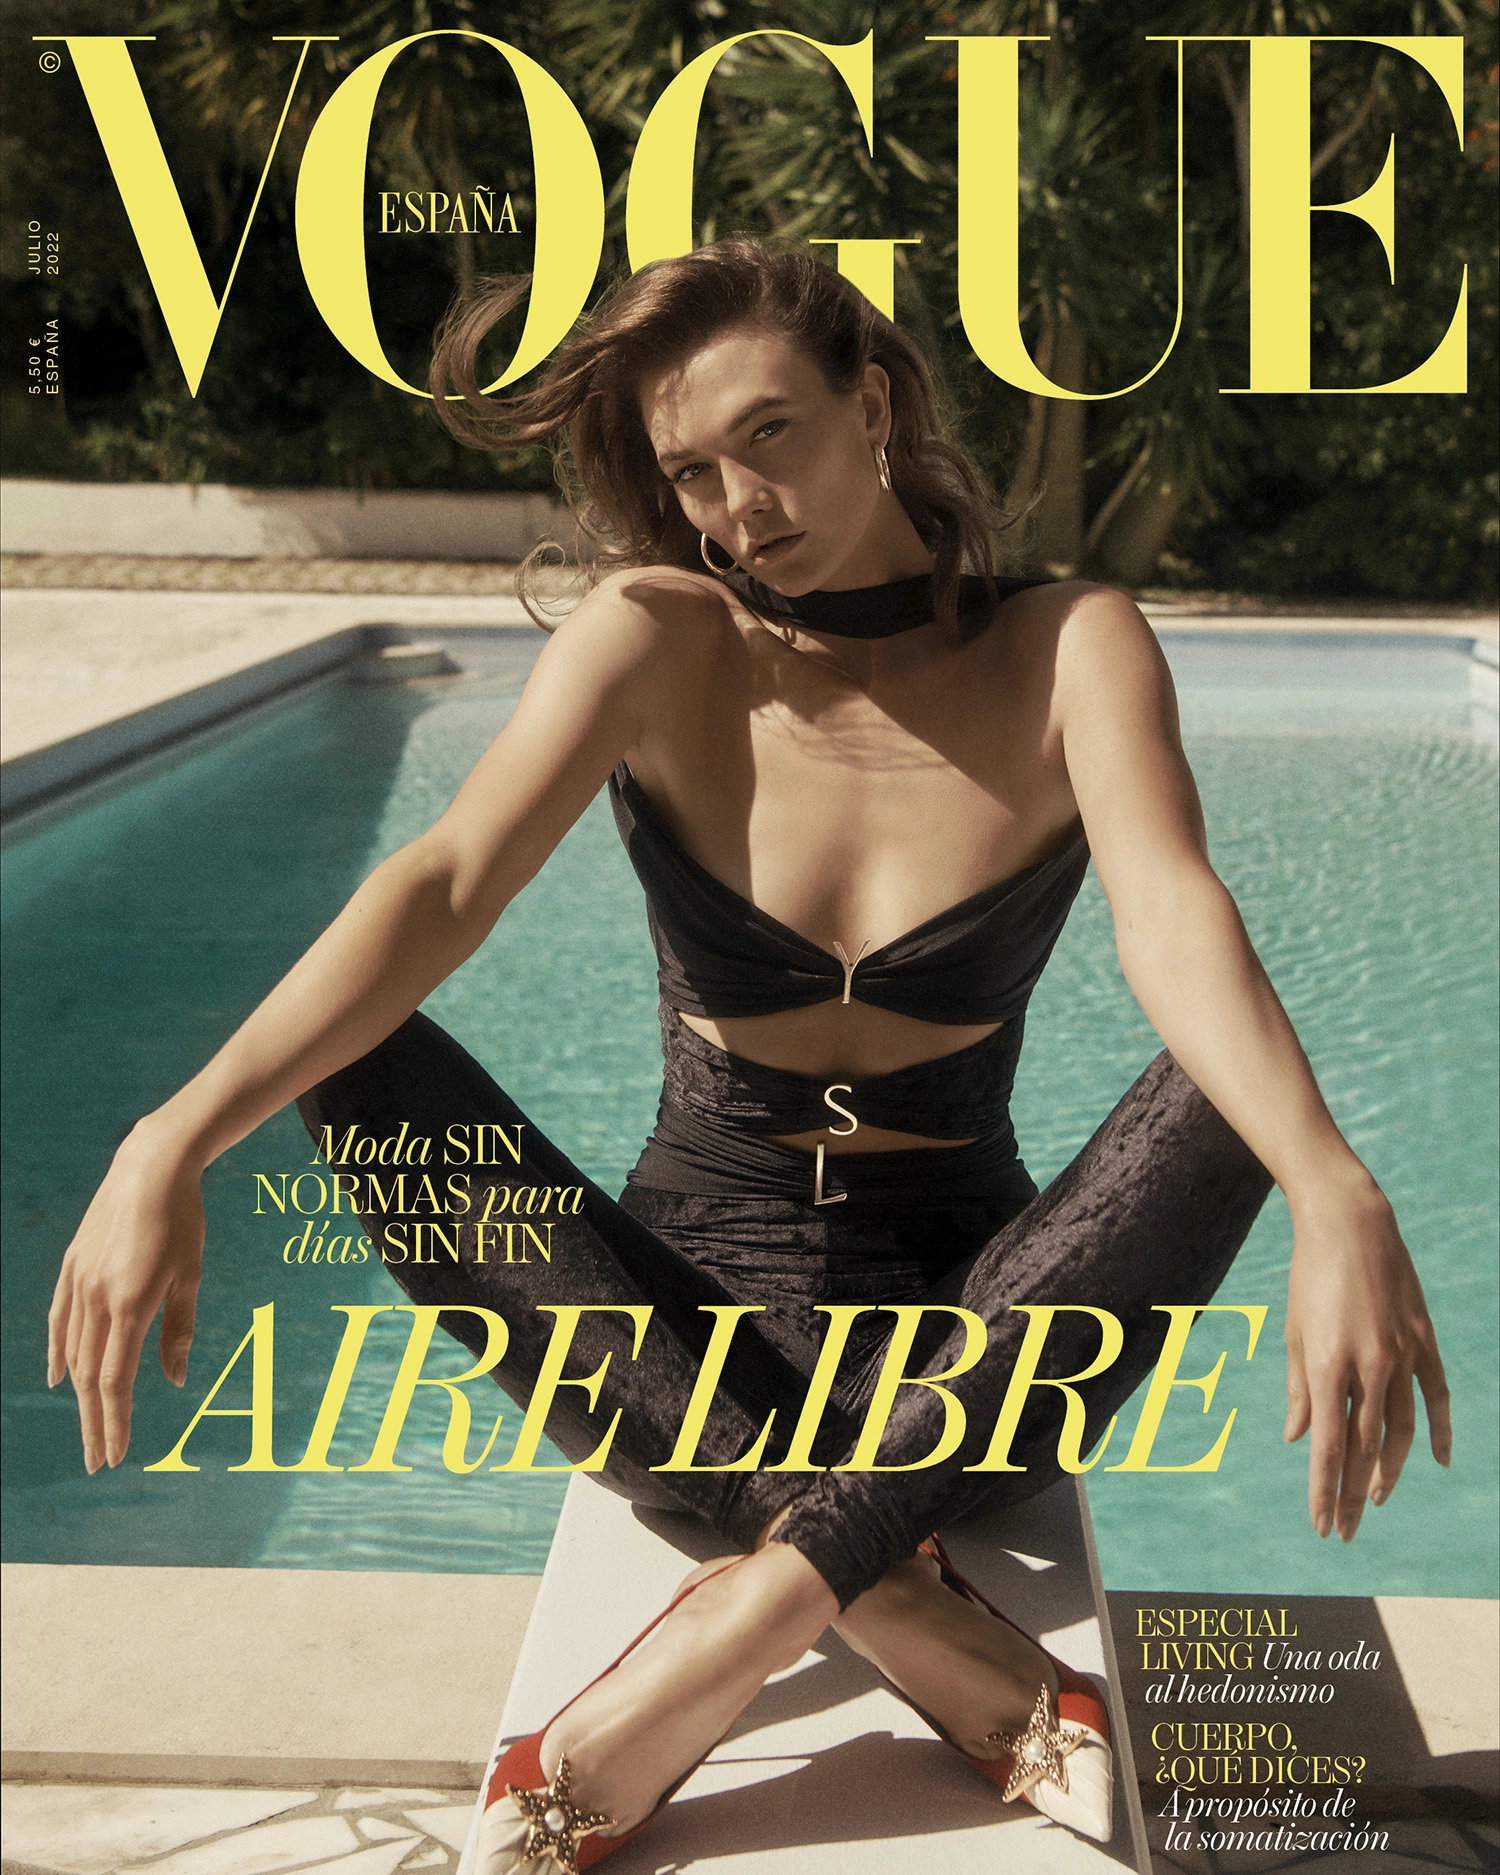 Karlie Kloss covers Vogue Spain July 2022 by Lachlan Bailey